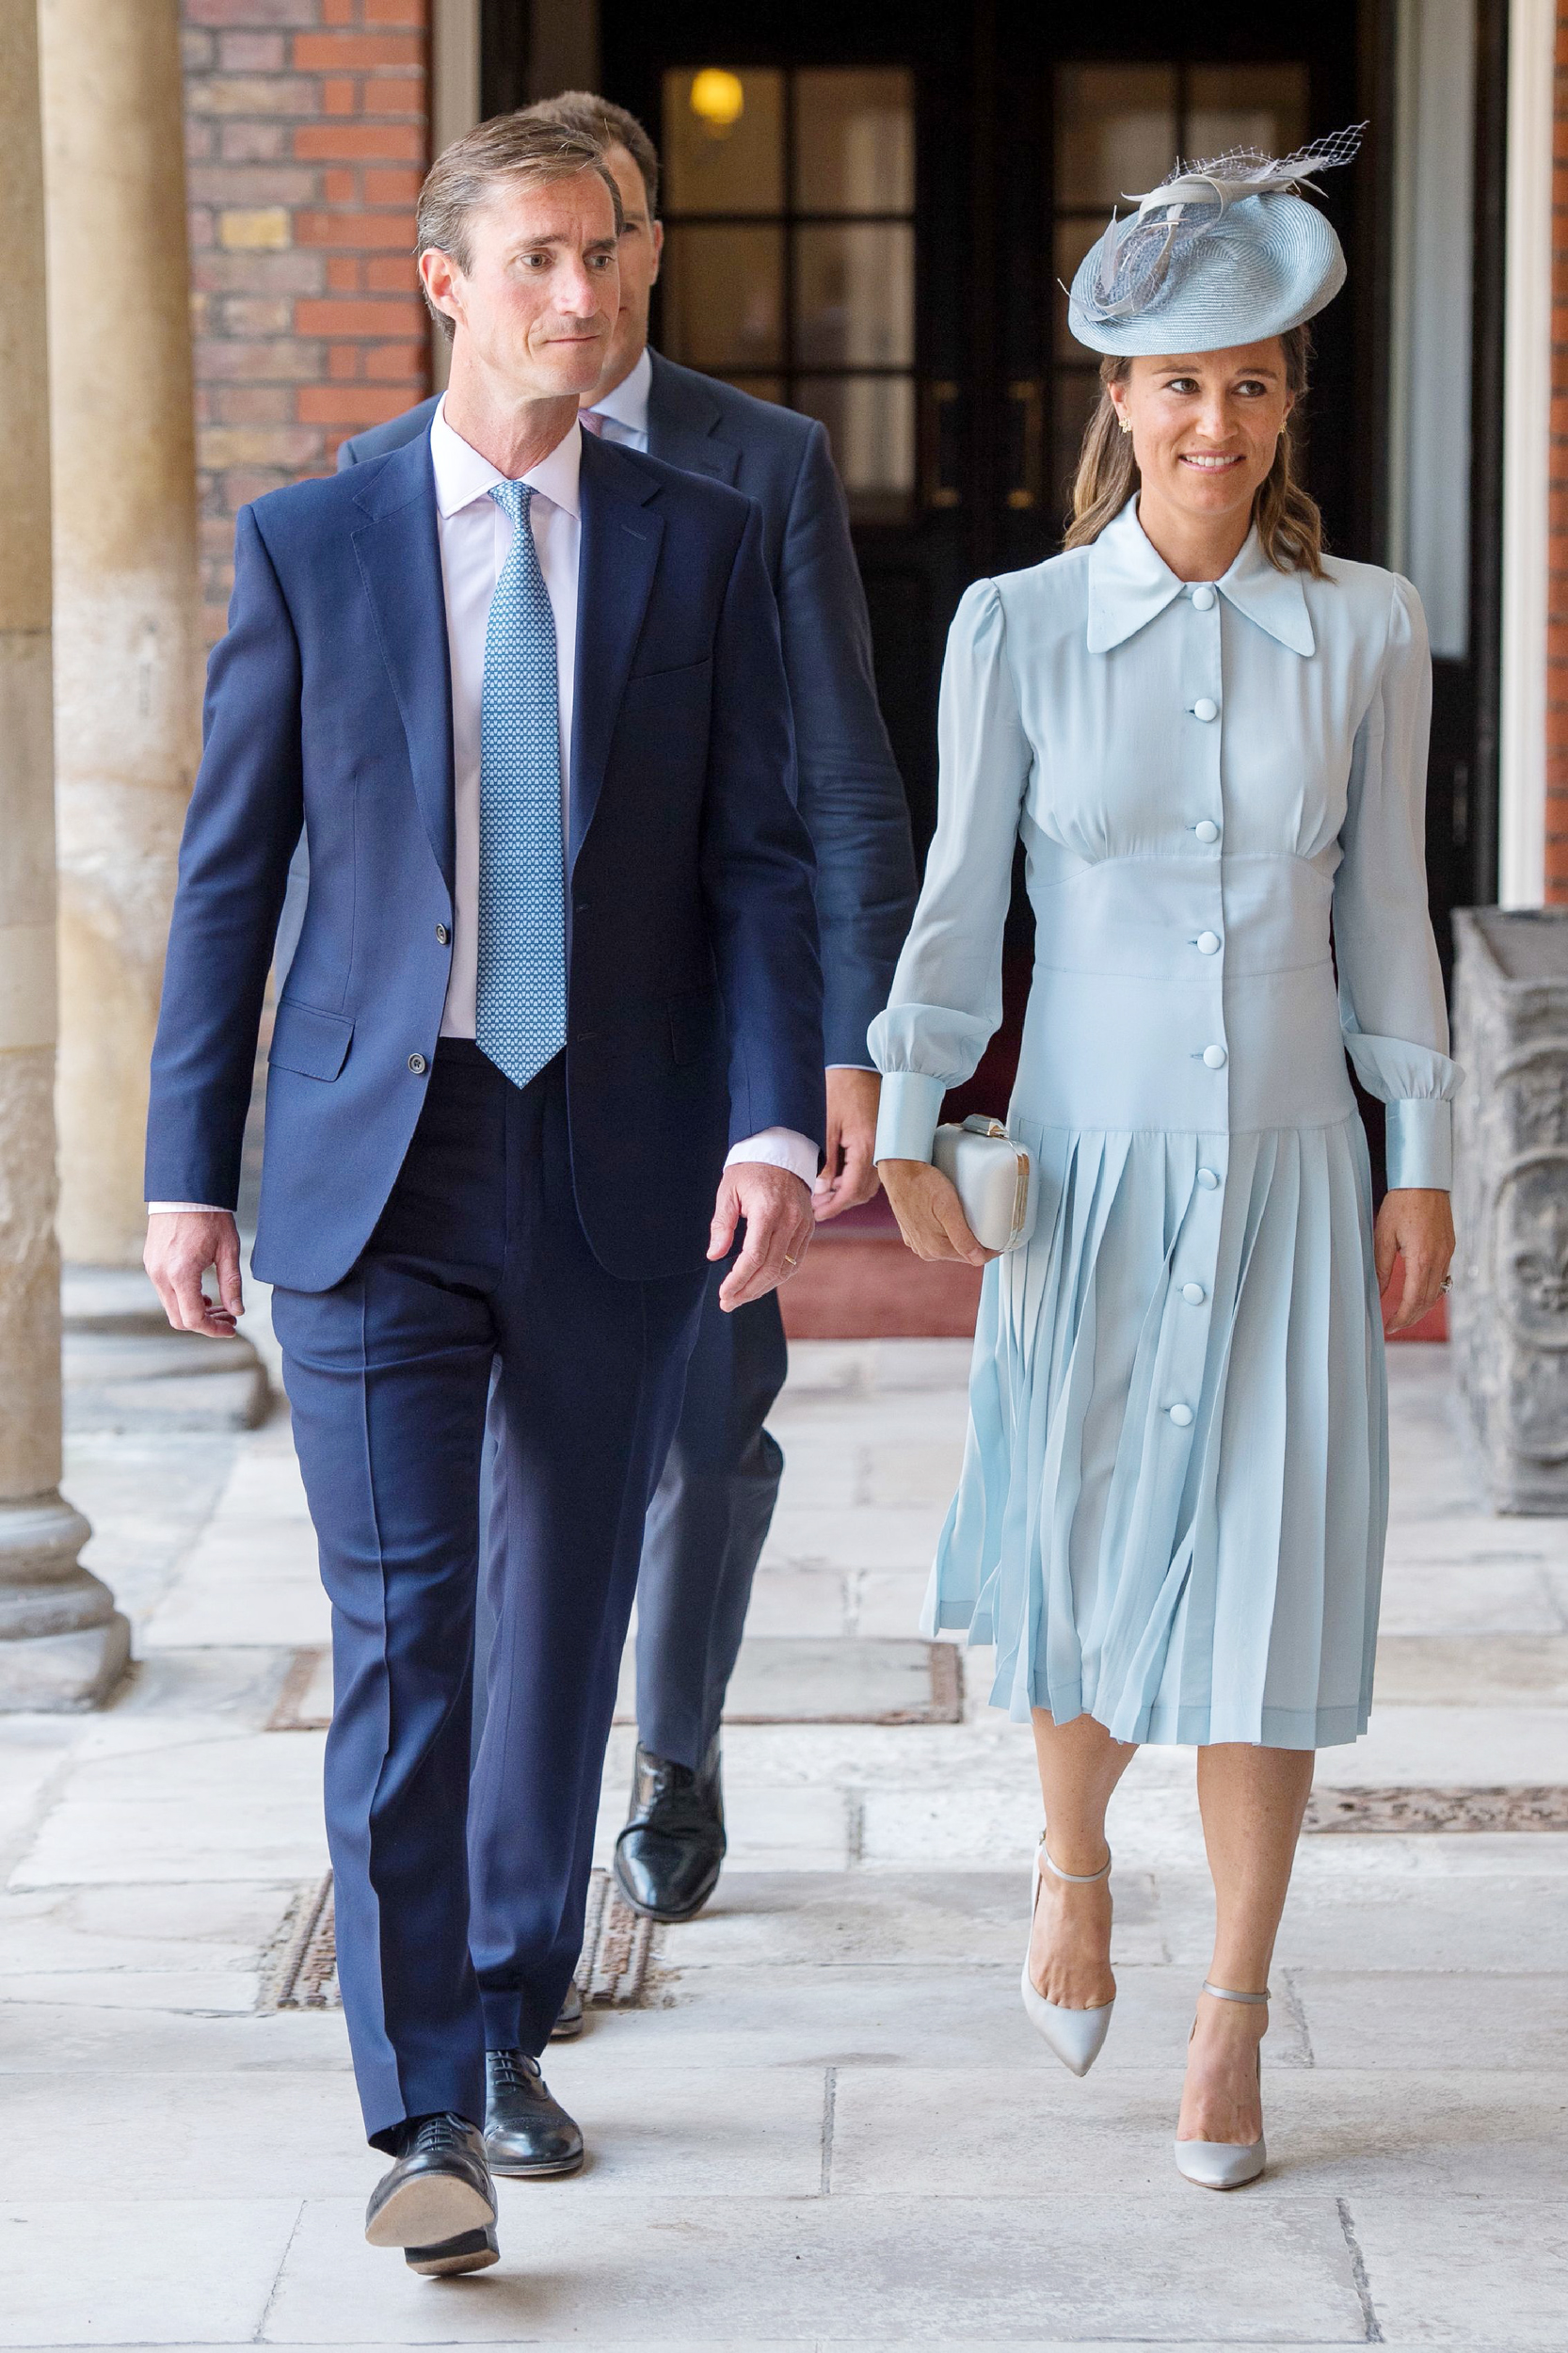 PHOTO: Pippa Middleton arrives with her husband James Matthews for the christening of Britain's Prince Louis of Cambridge at the Chapel Royal, St James's Palace, London on July 9, 2018.